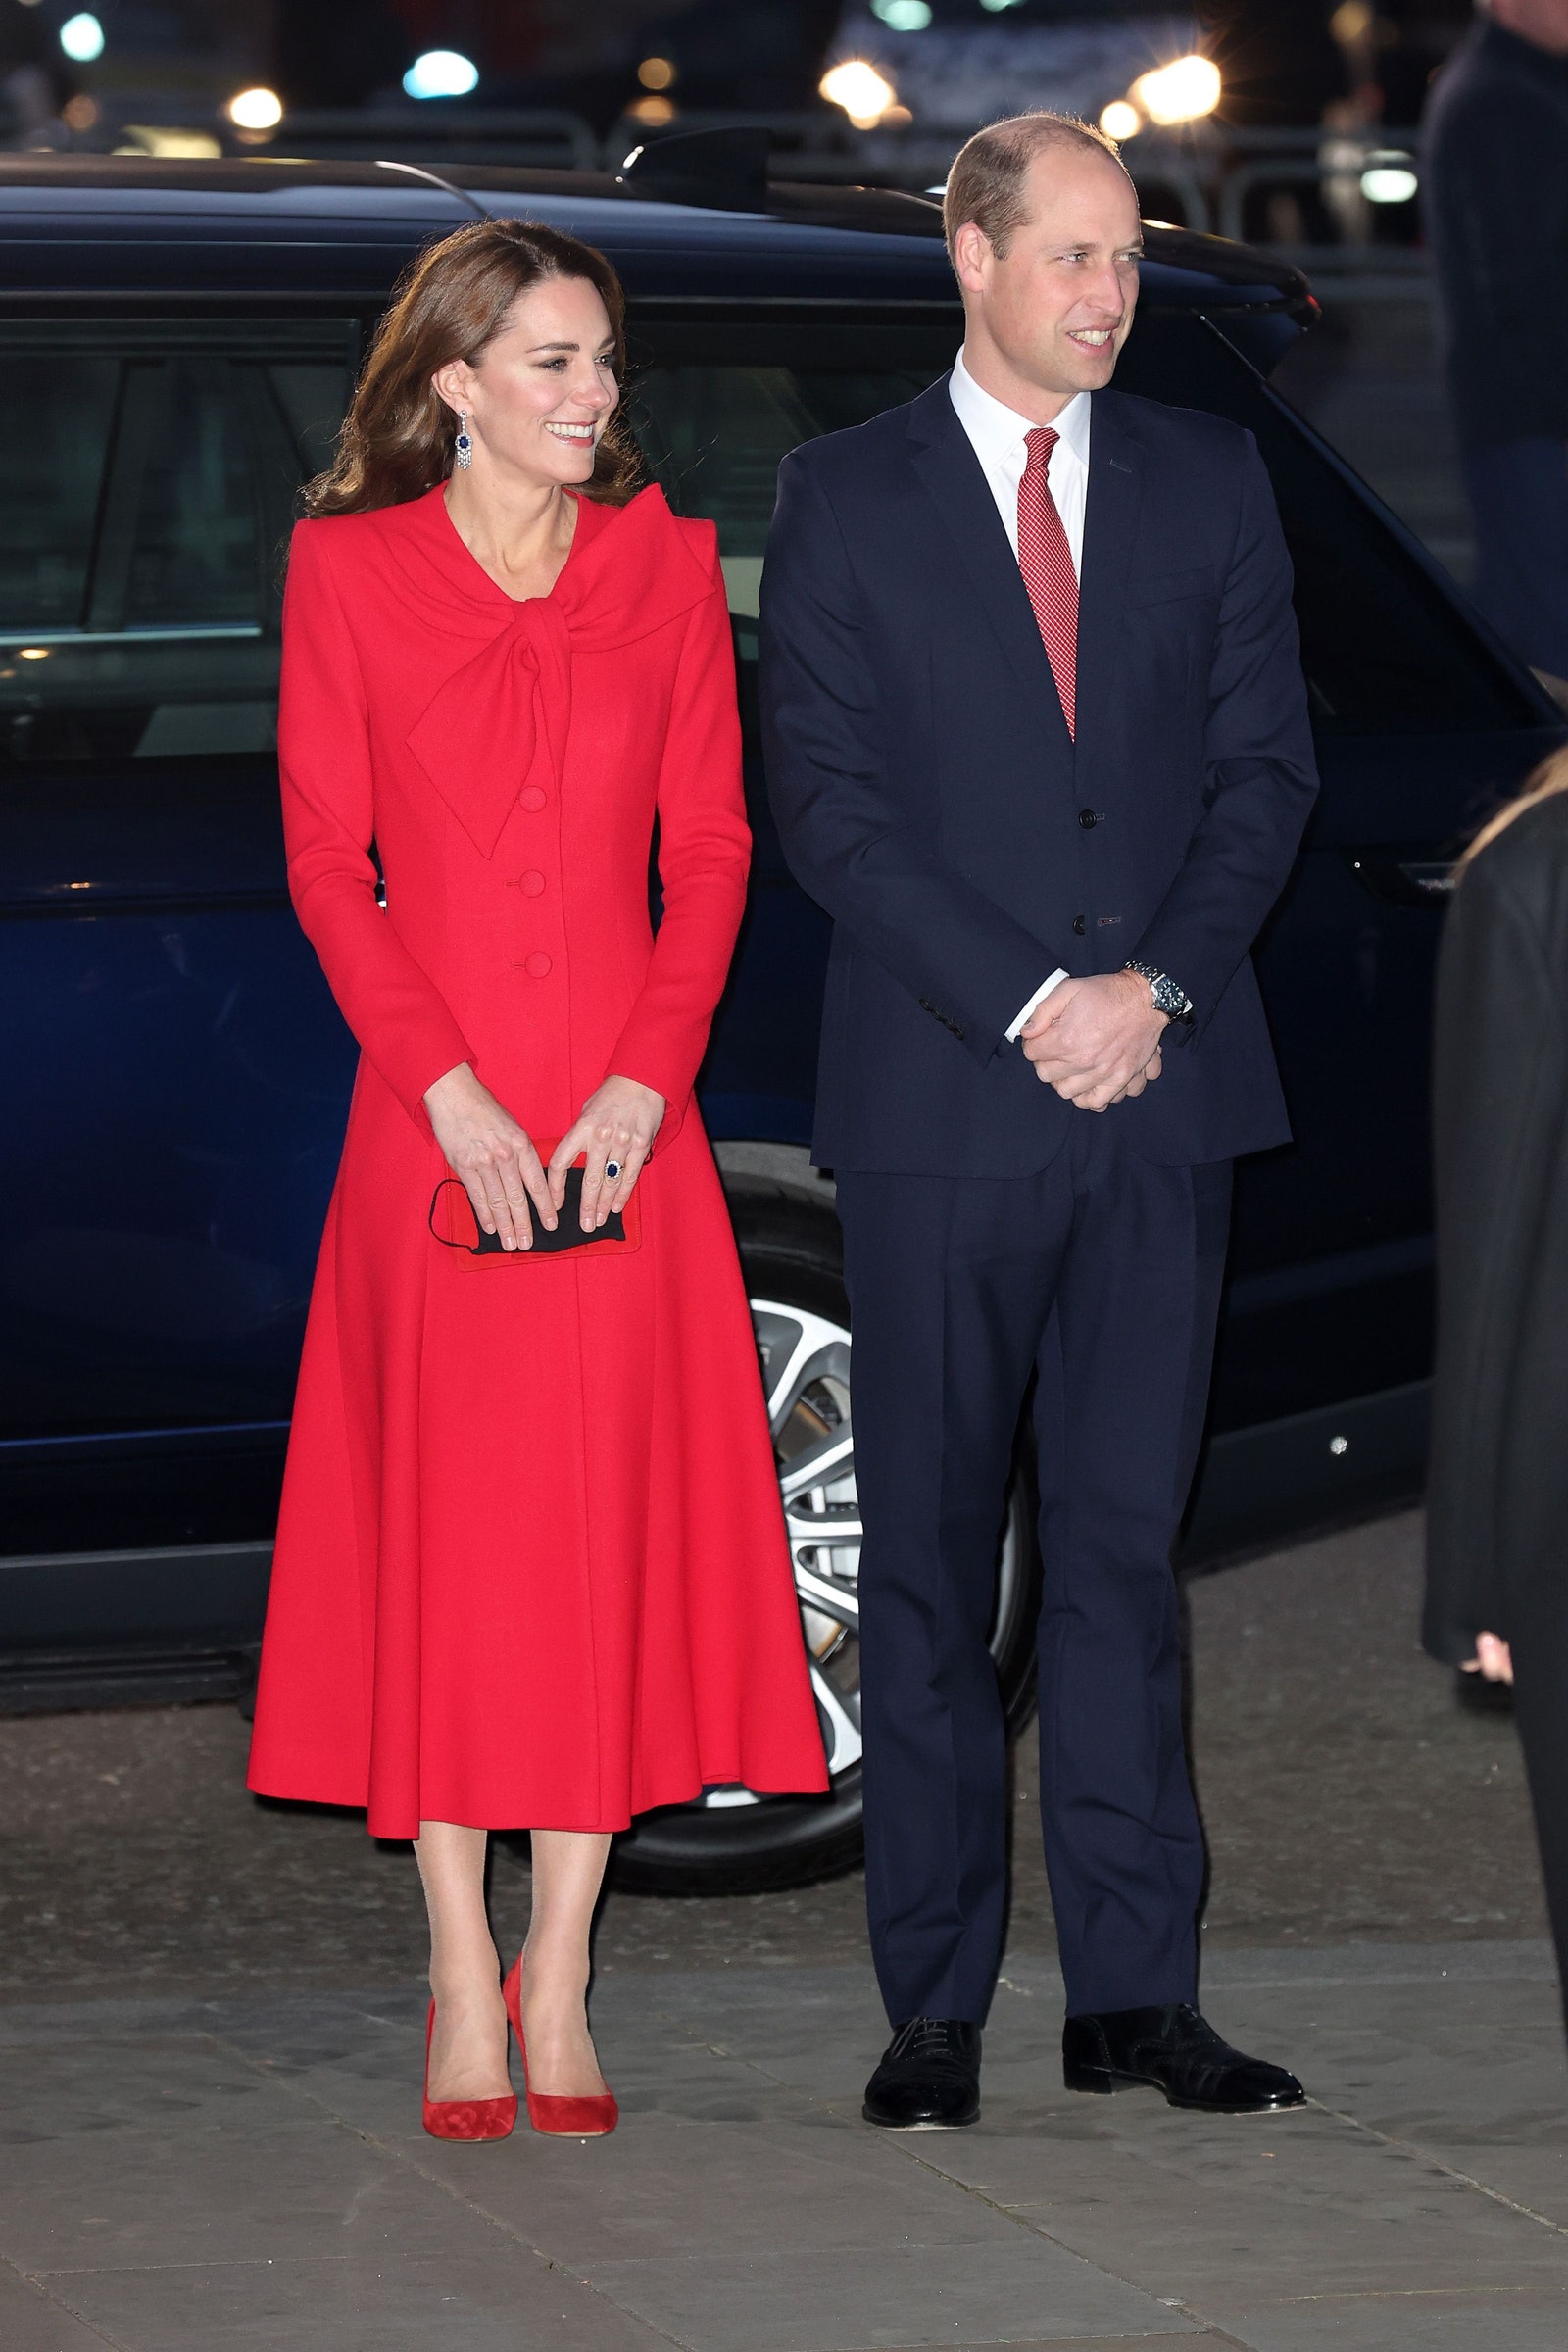 Duchess of Cambridge Kate Middleton stunned in a red dress recently